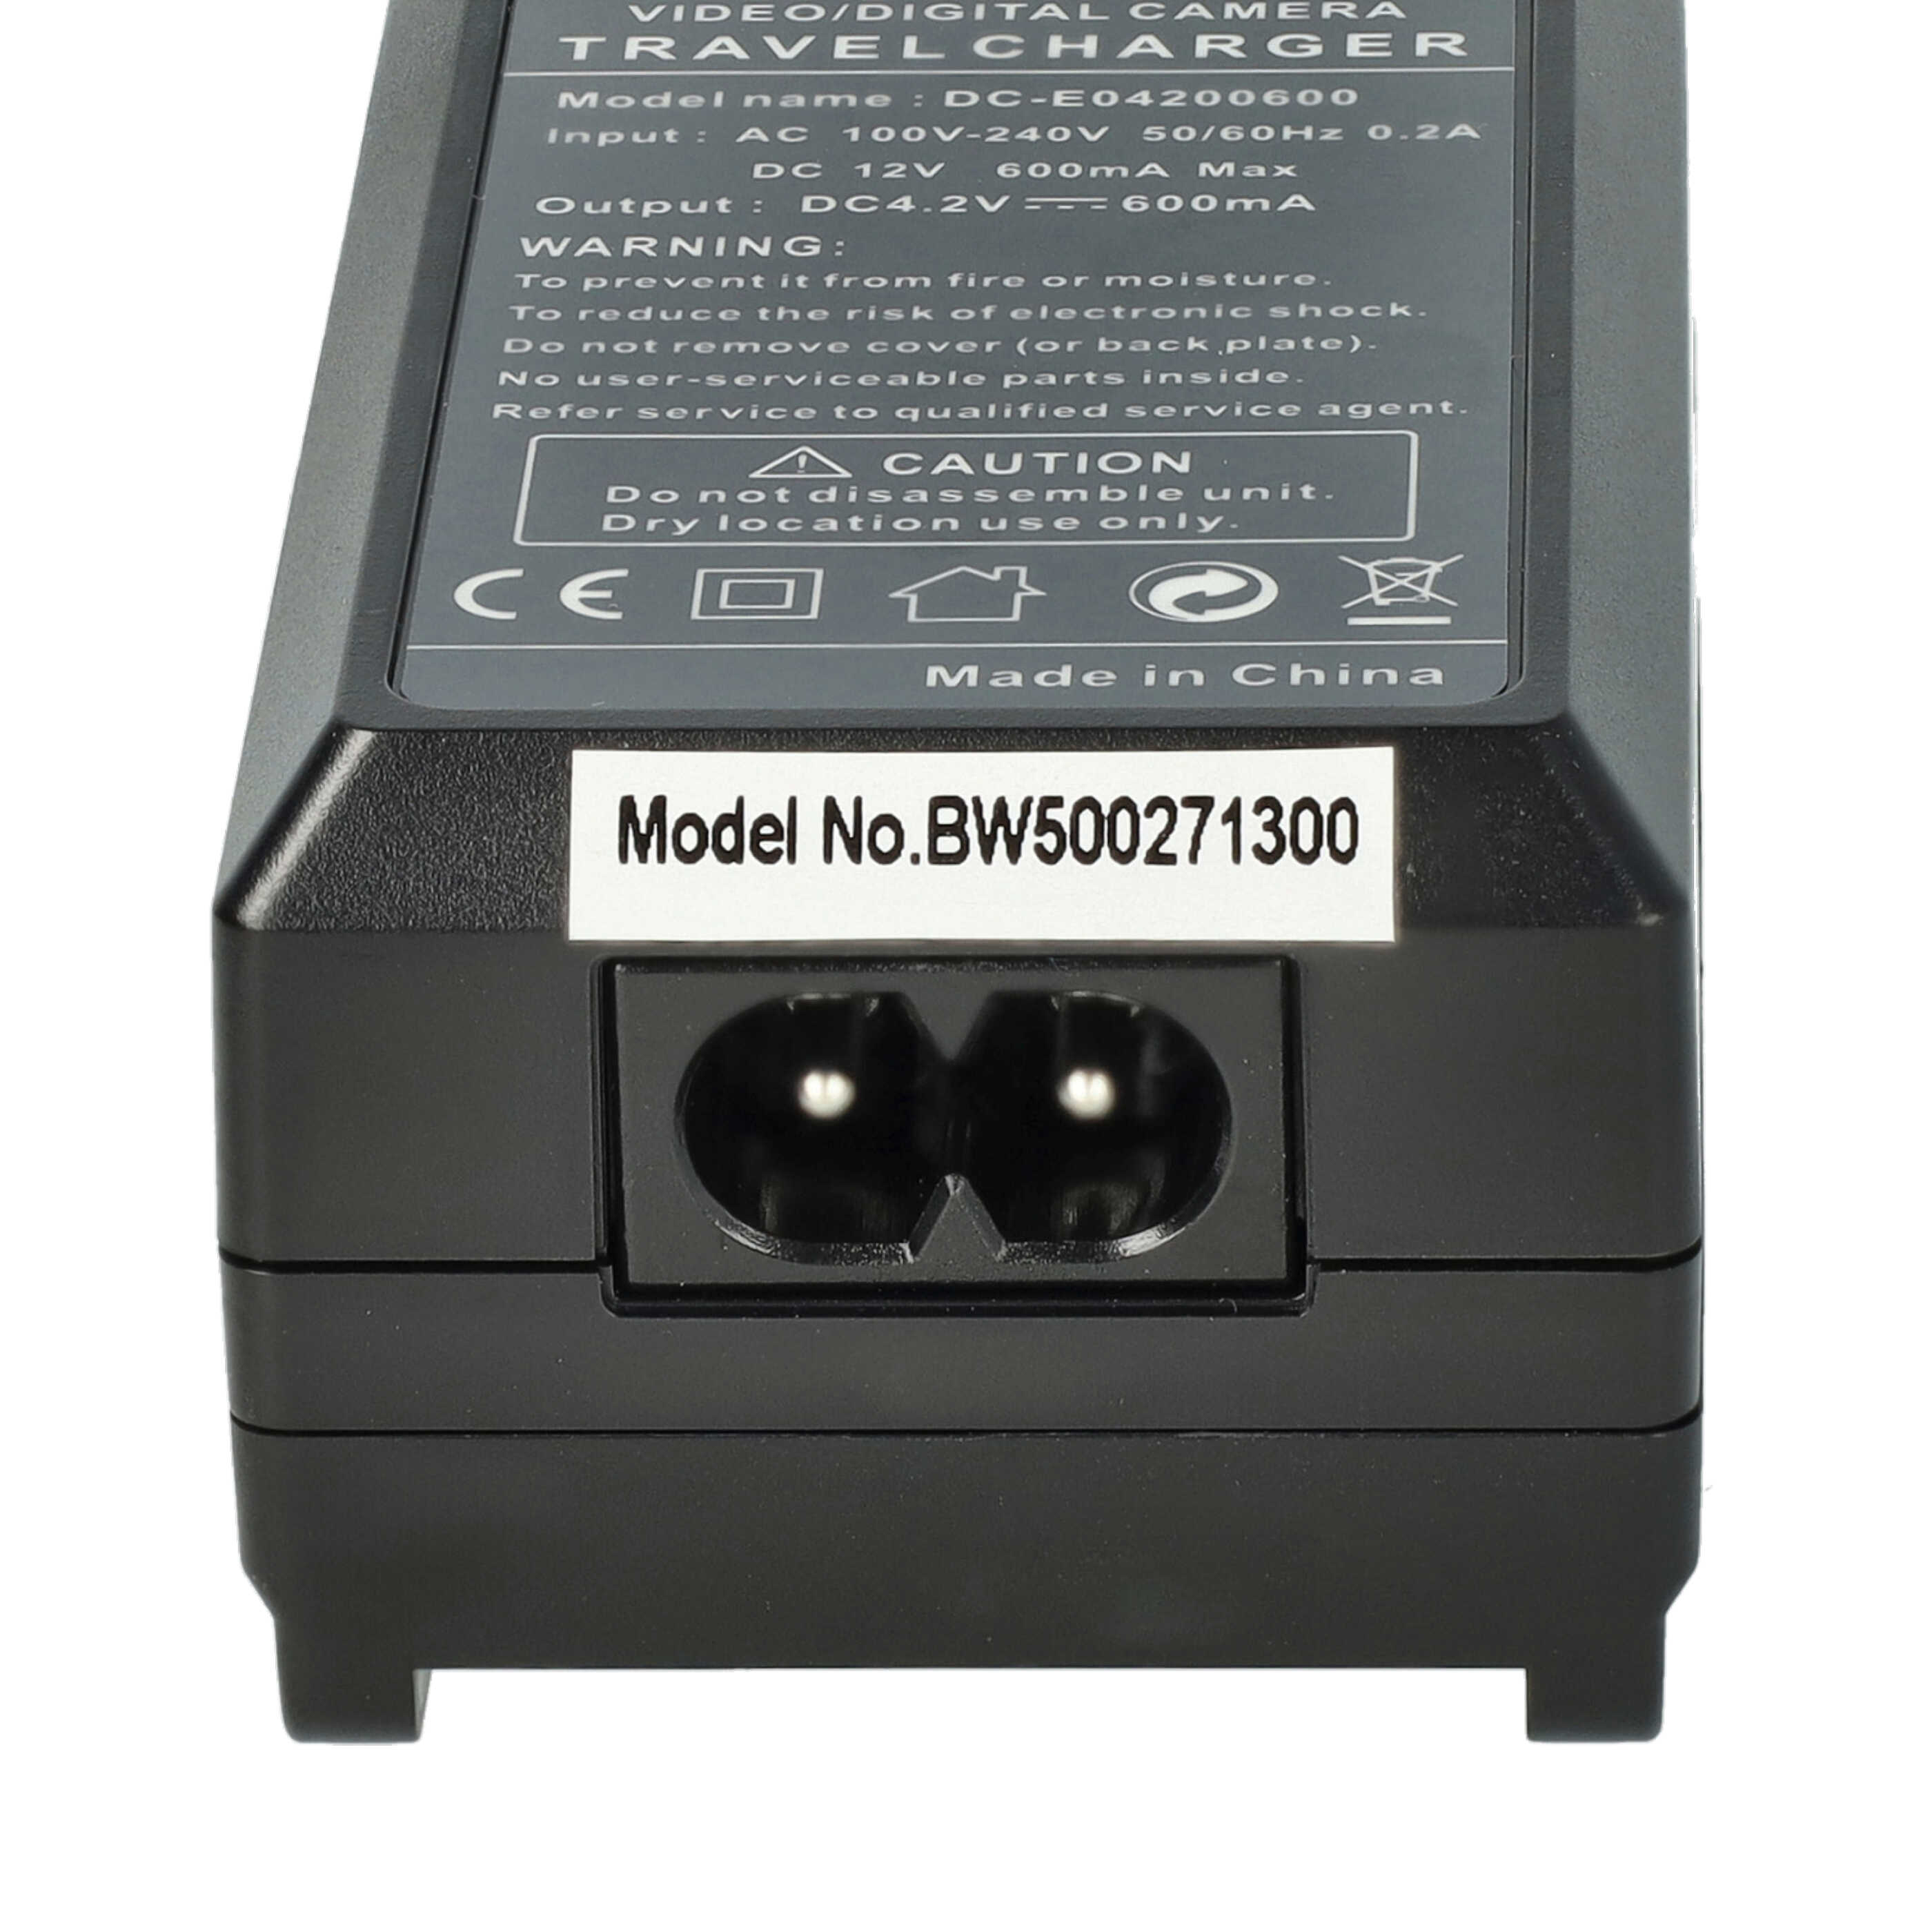 Battery Charger suitable for Canon NB-8L Camera etc. - 0.6 A, 4.2 V